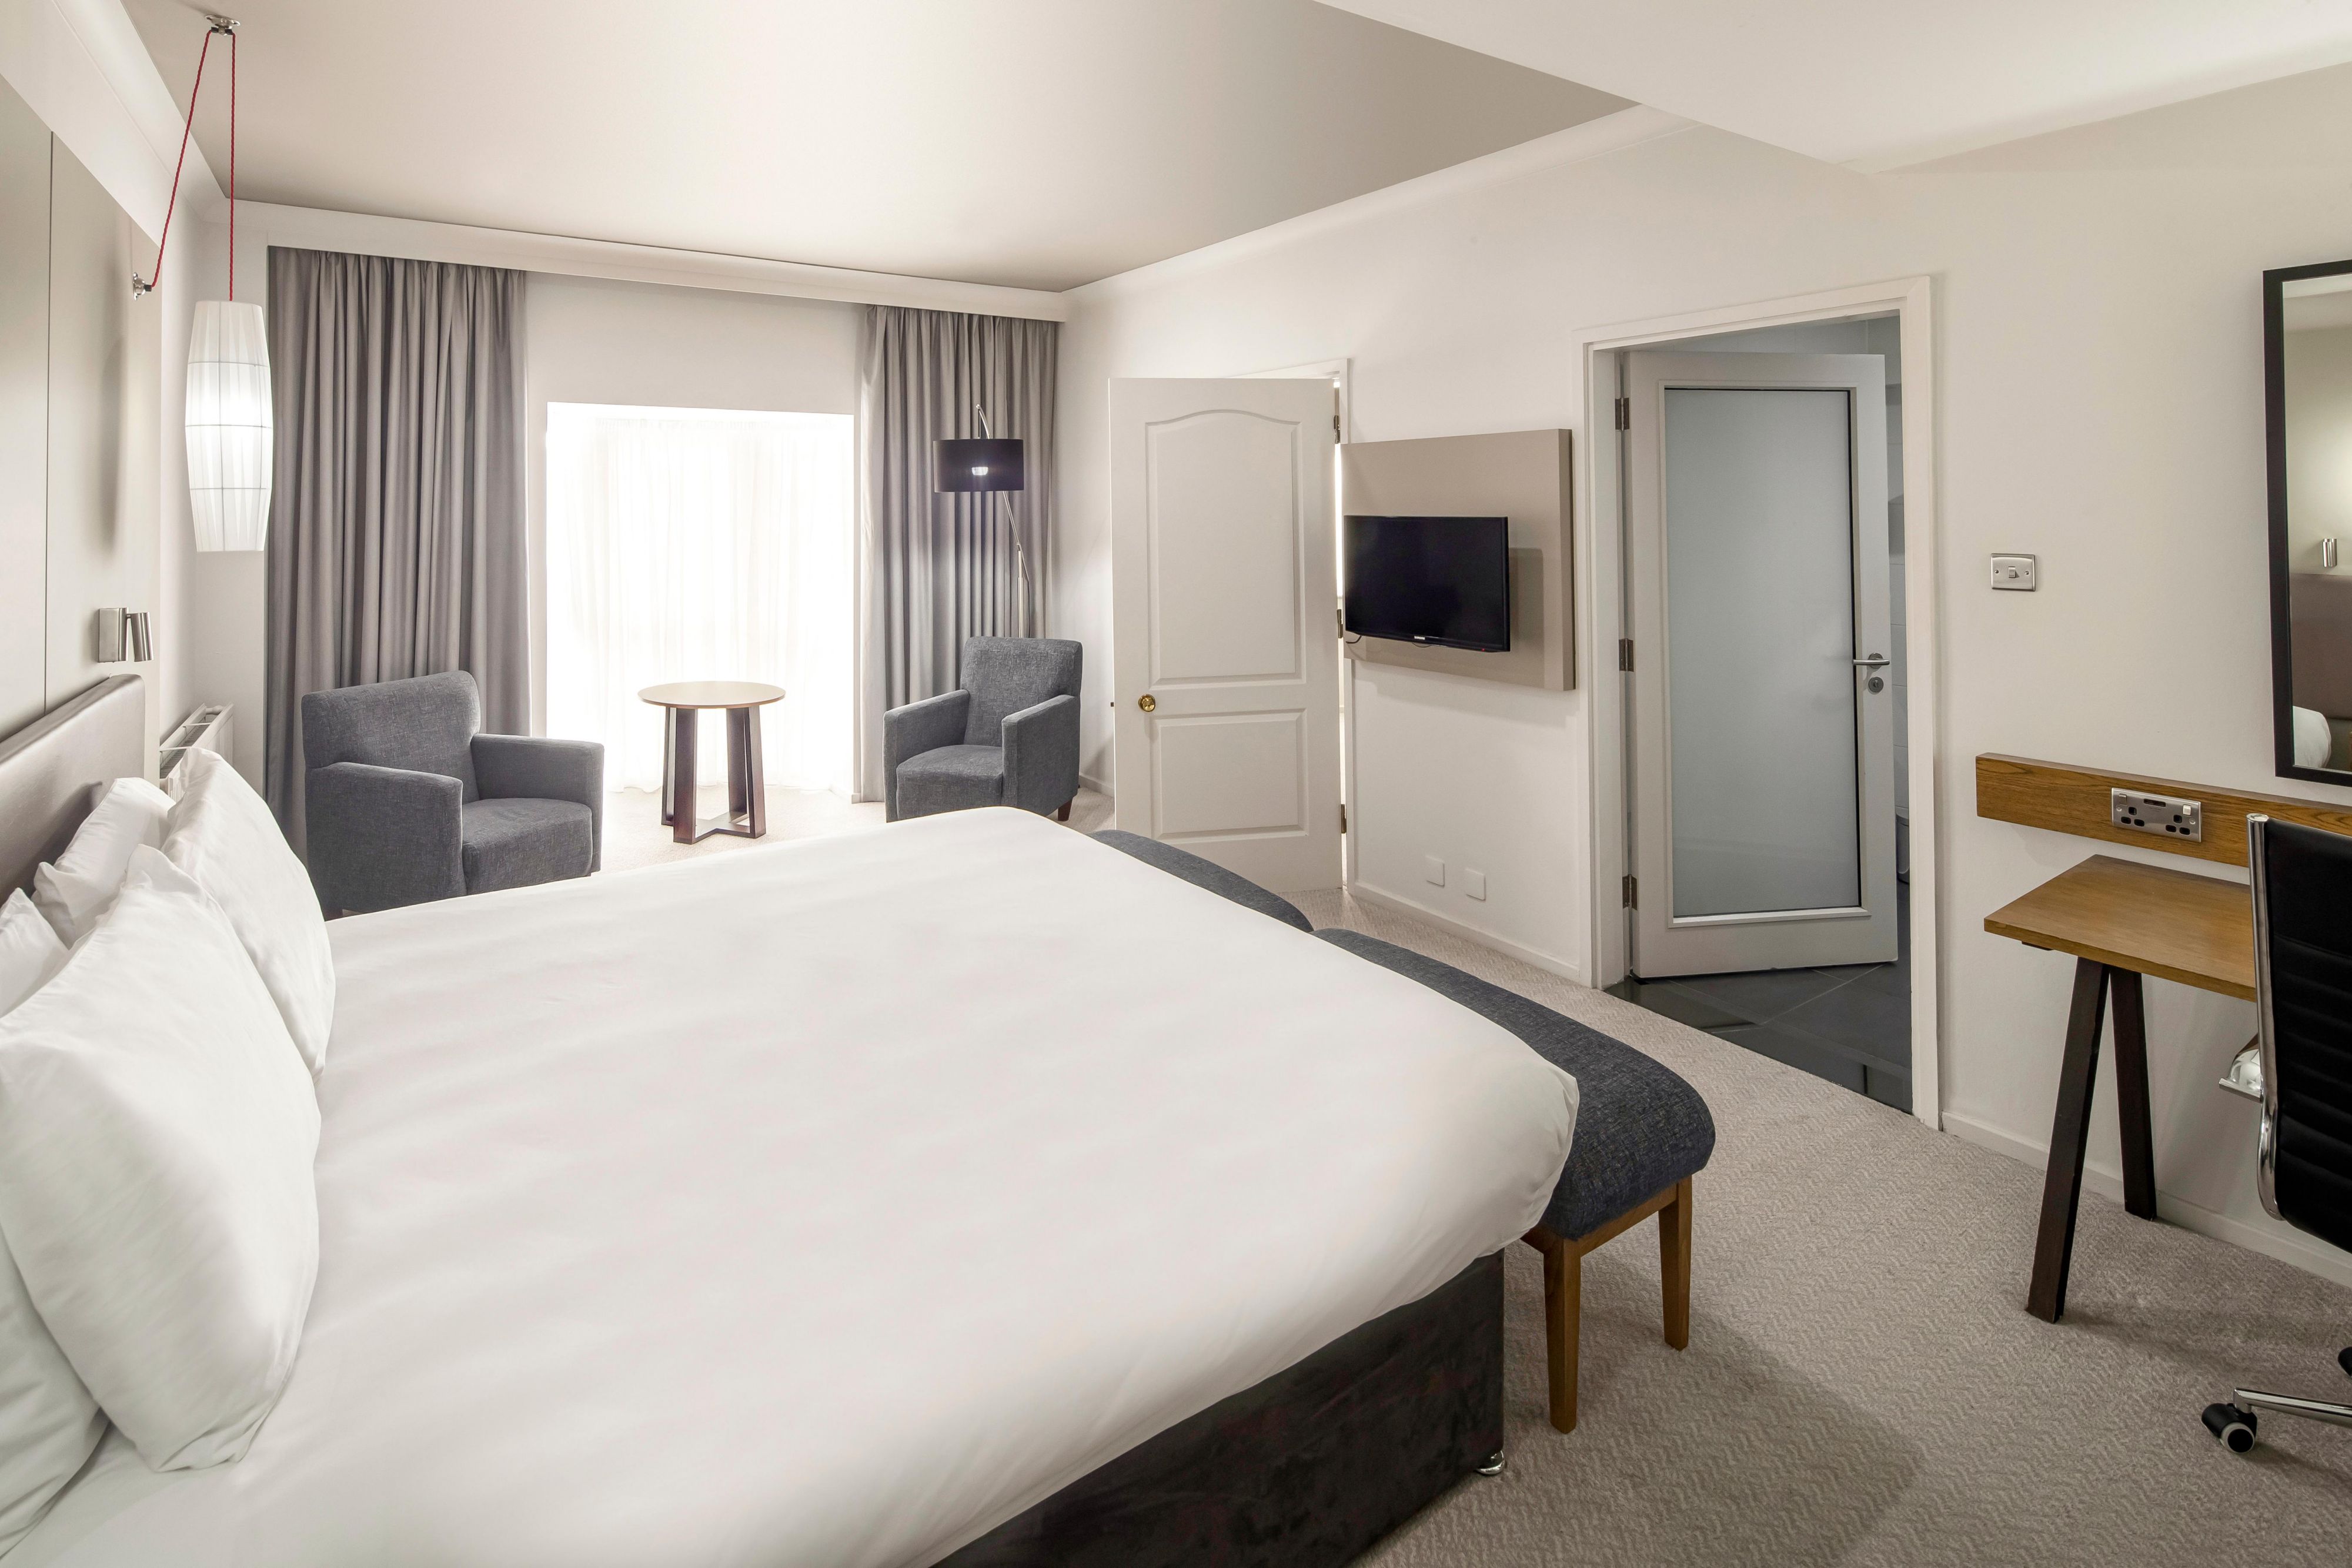 Enjoy your stay in our spacious King Executive suite.